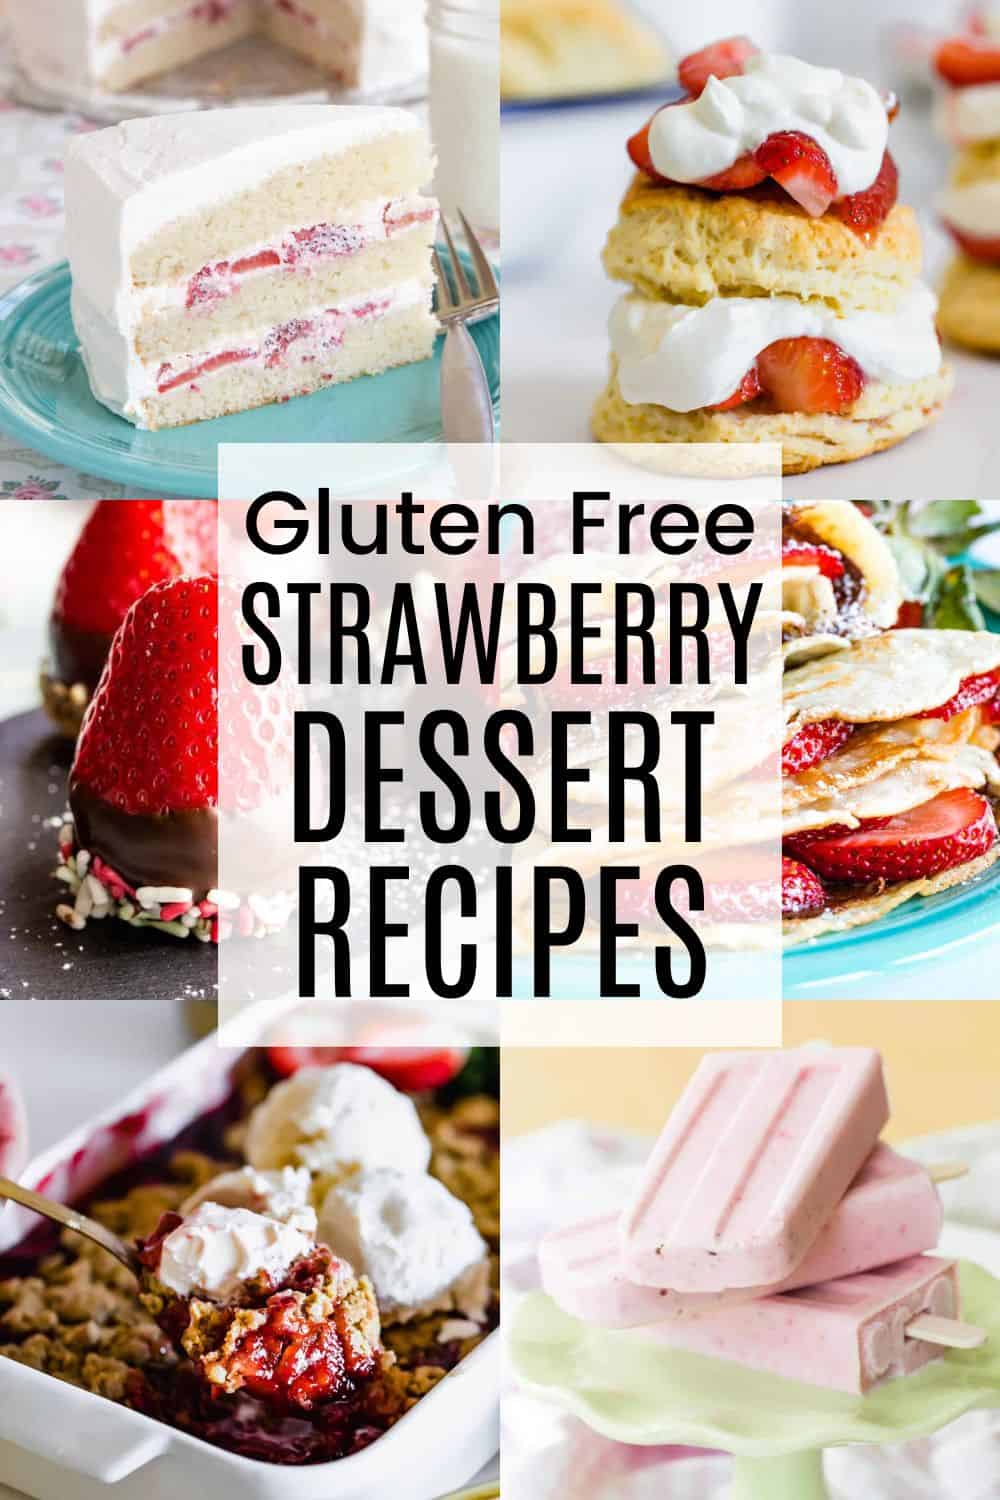 A two-by-three collage of a slice of strawberries and cream cake, strawberry nutella crepes, strawberry crumble, a strawberry shortcake, and other strawberry desserts with a white box in the middle with text overlay that says "Gluten Free Strawberry Dessert Recipes".